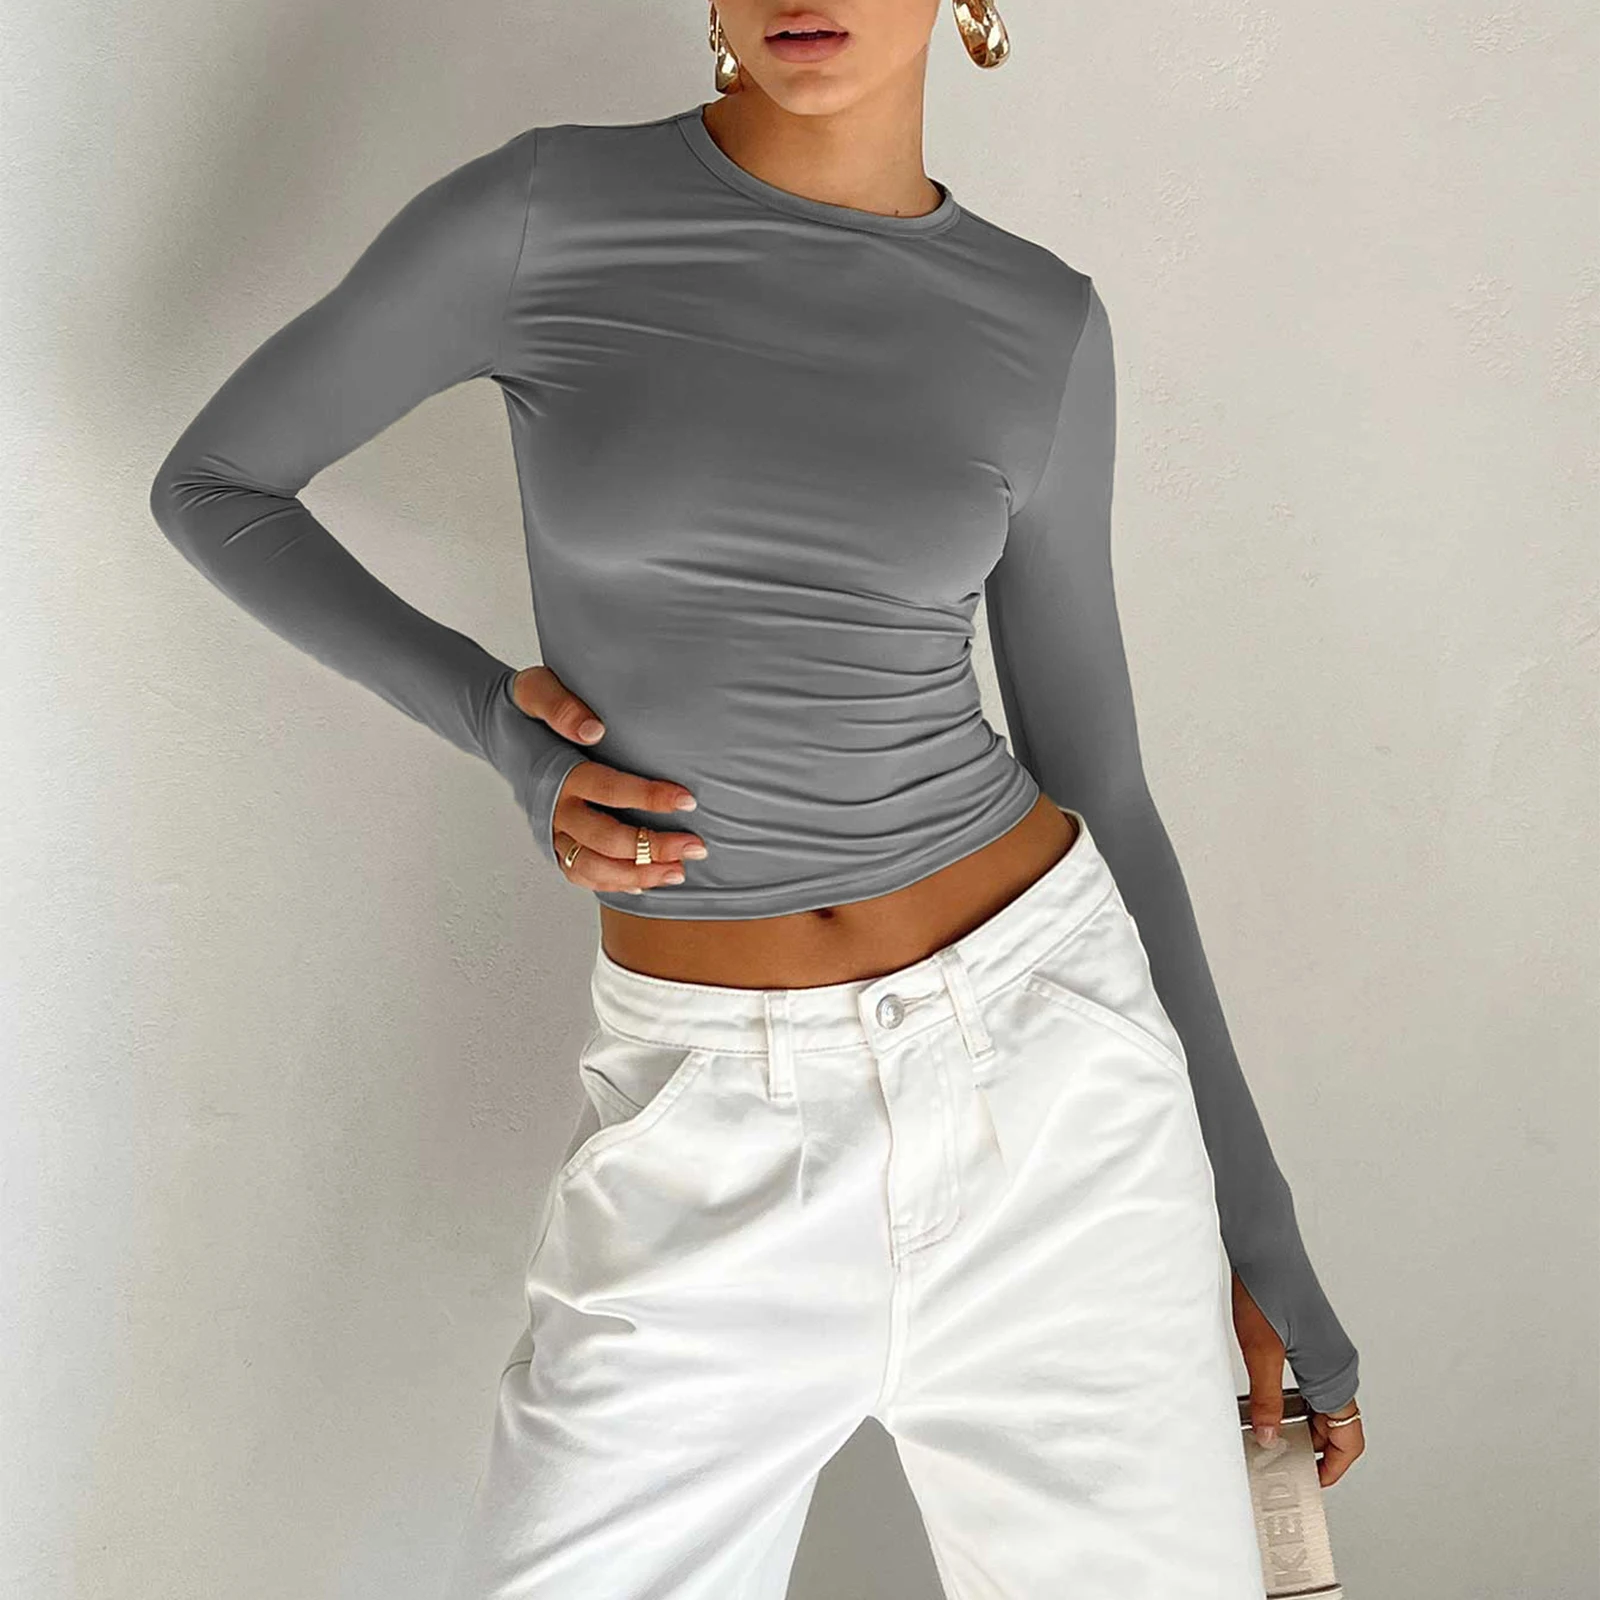 

Women's Vintage Retro Yoga Shirts Slim Fit Crop Tops Long Sleeve Crew Neck Solid Color Basic Casual T-Shirts with Thumb Holes